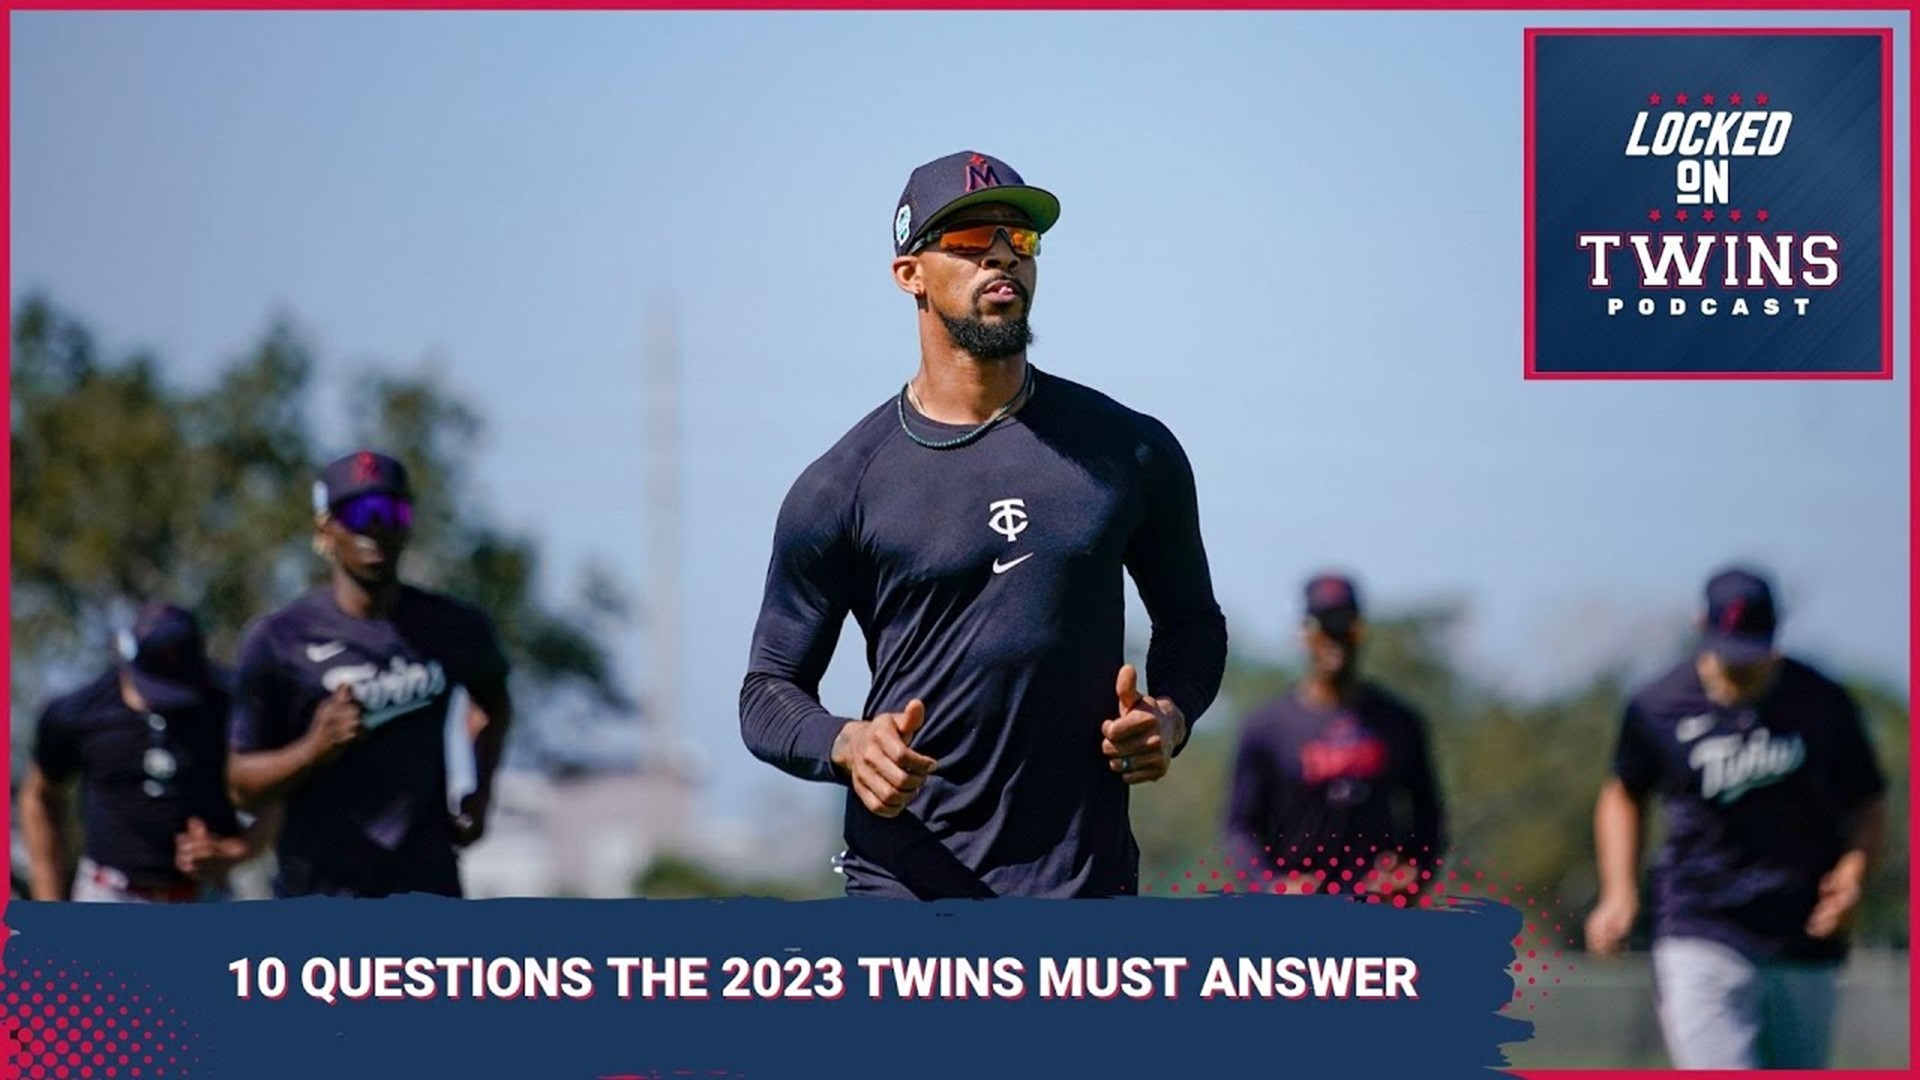 The Minnesota Twins need to answer these 10 questions during the 2023 season, says LockedOn Twins' Brandon Warne.